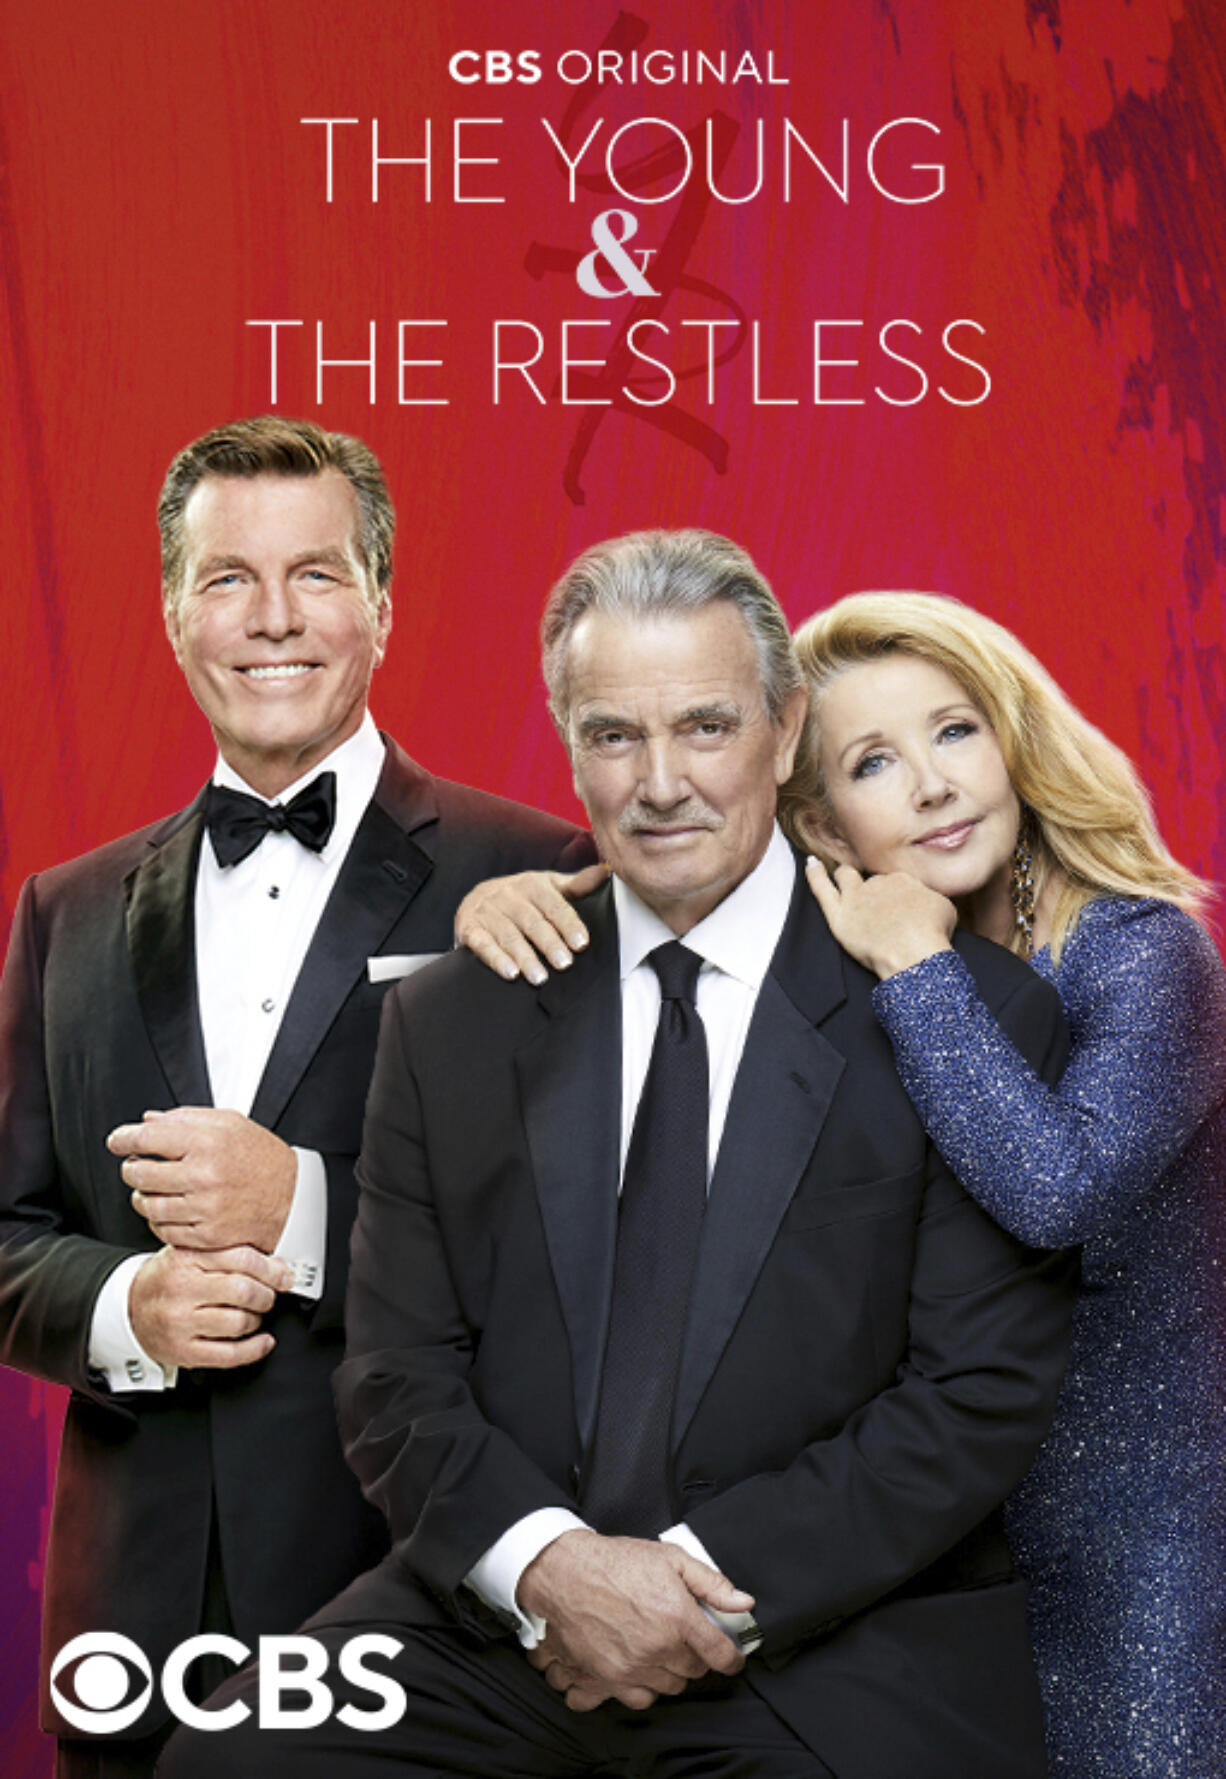 This image released by CBS shows promotional art for the daytime drama series "The Young & The Restless" which is celebrating their 50th anniversary.